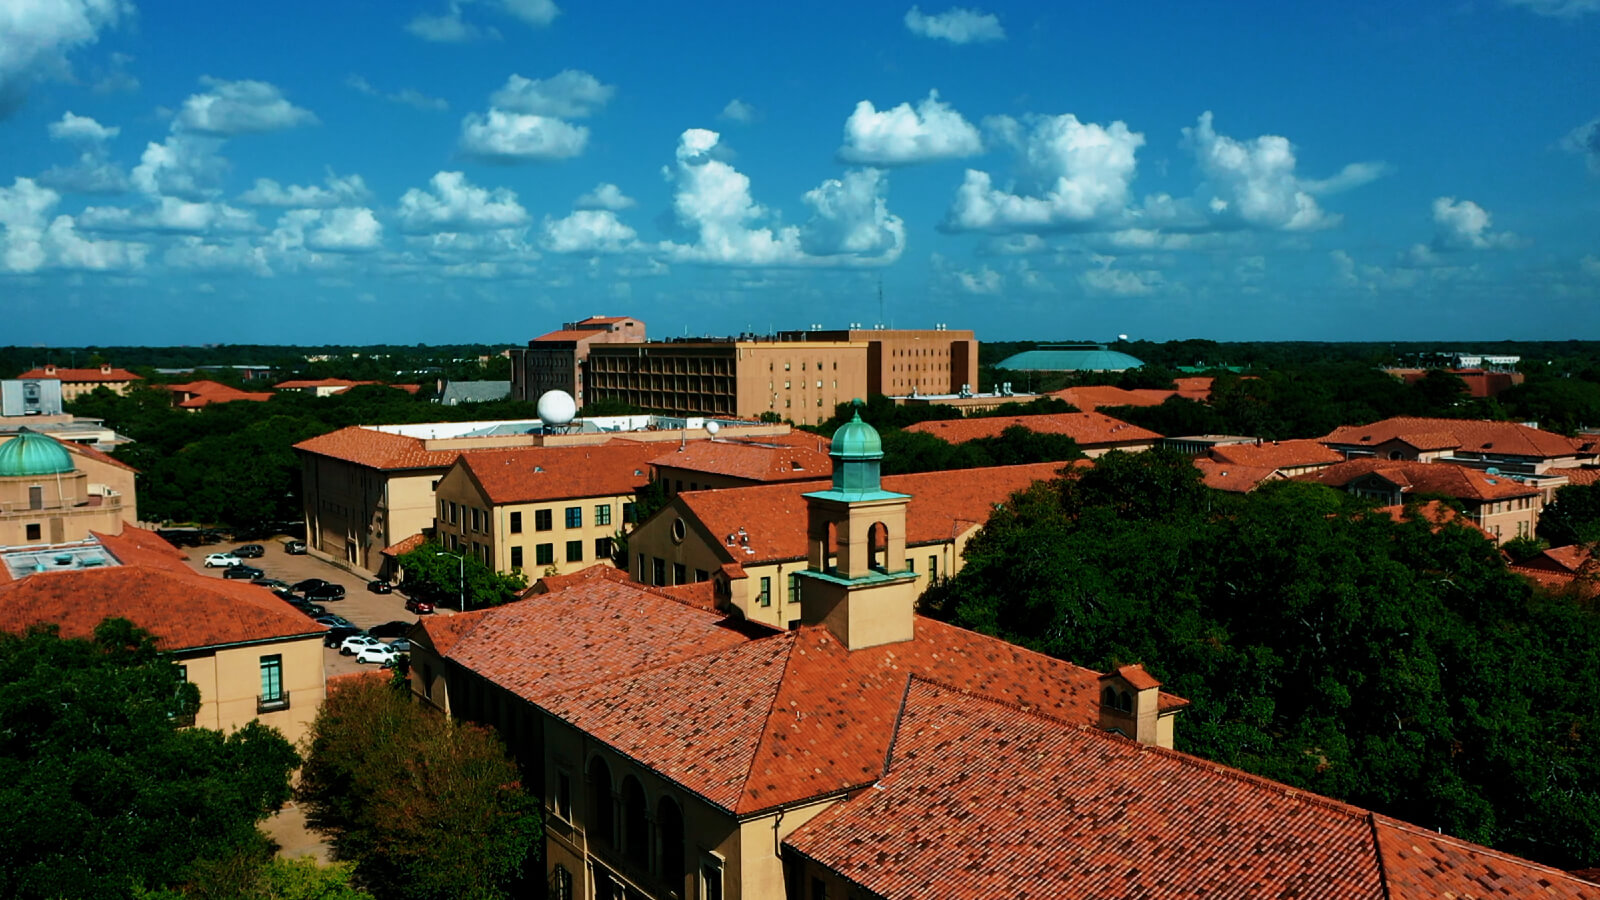 Rooftops at LSU campus